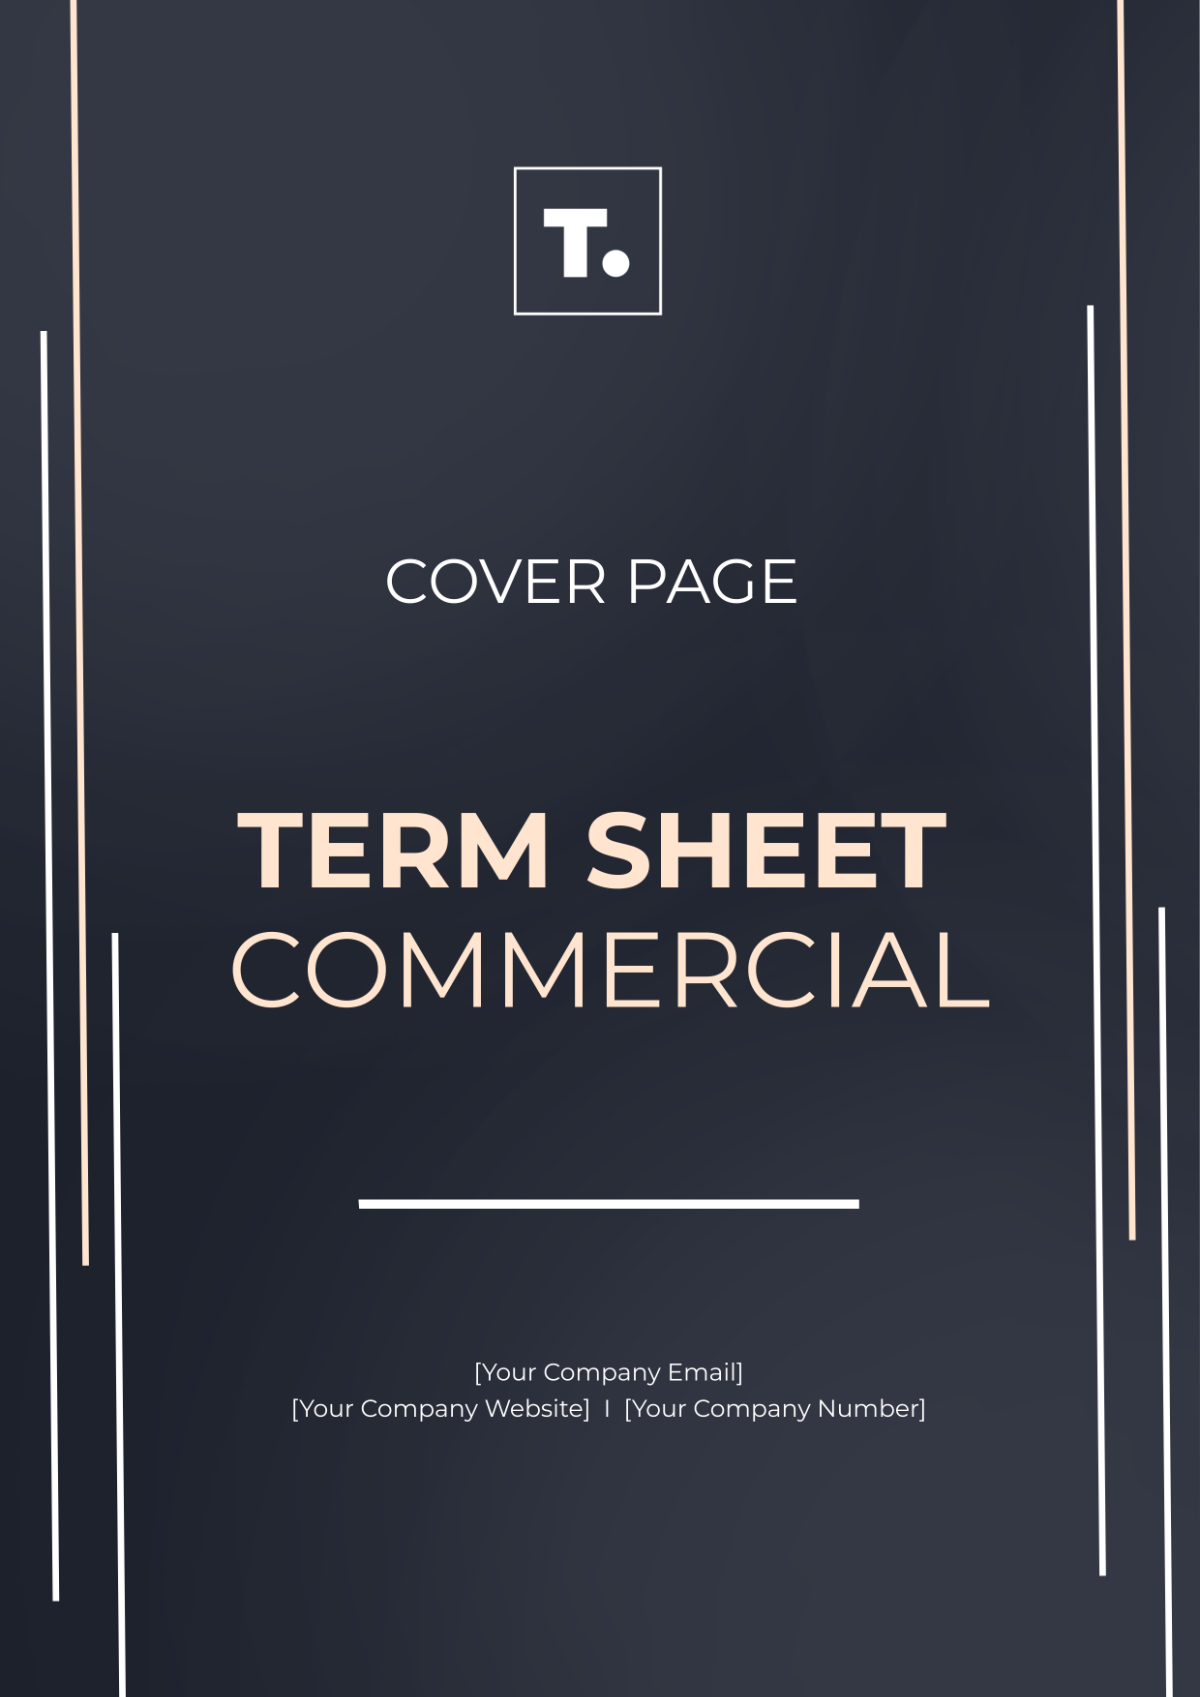 Term Sheet Commercial Cover Page